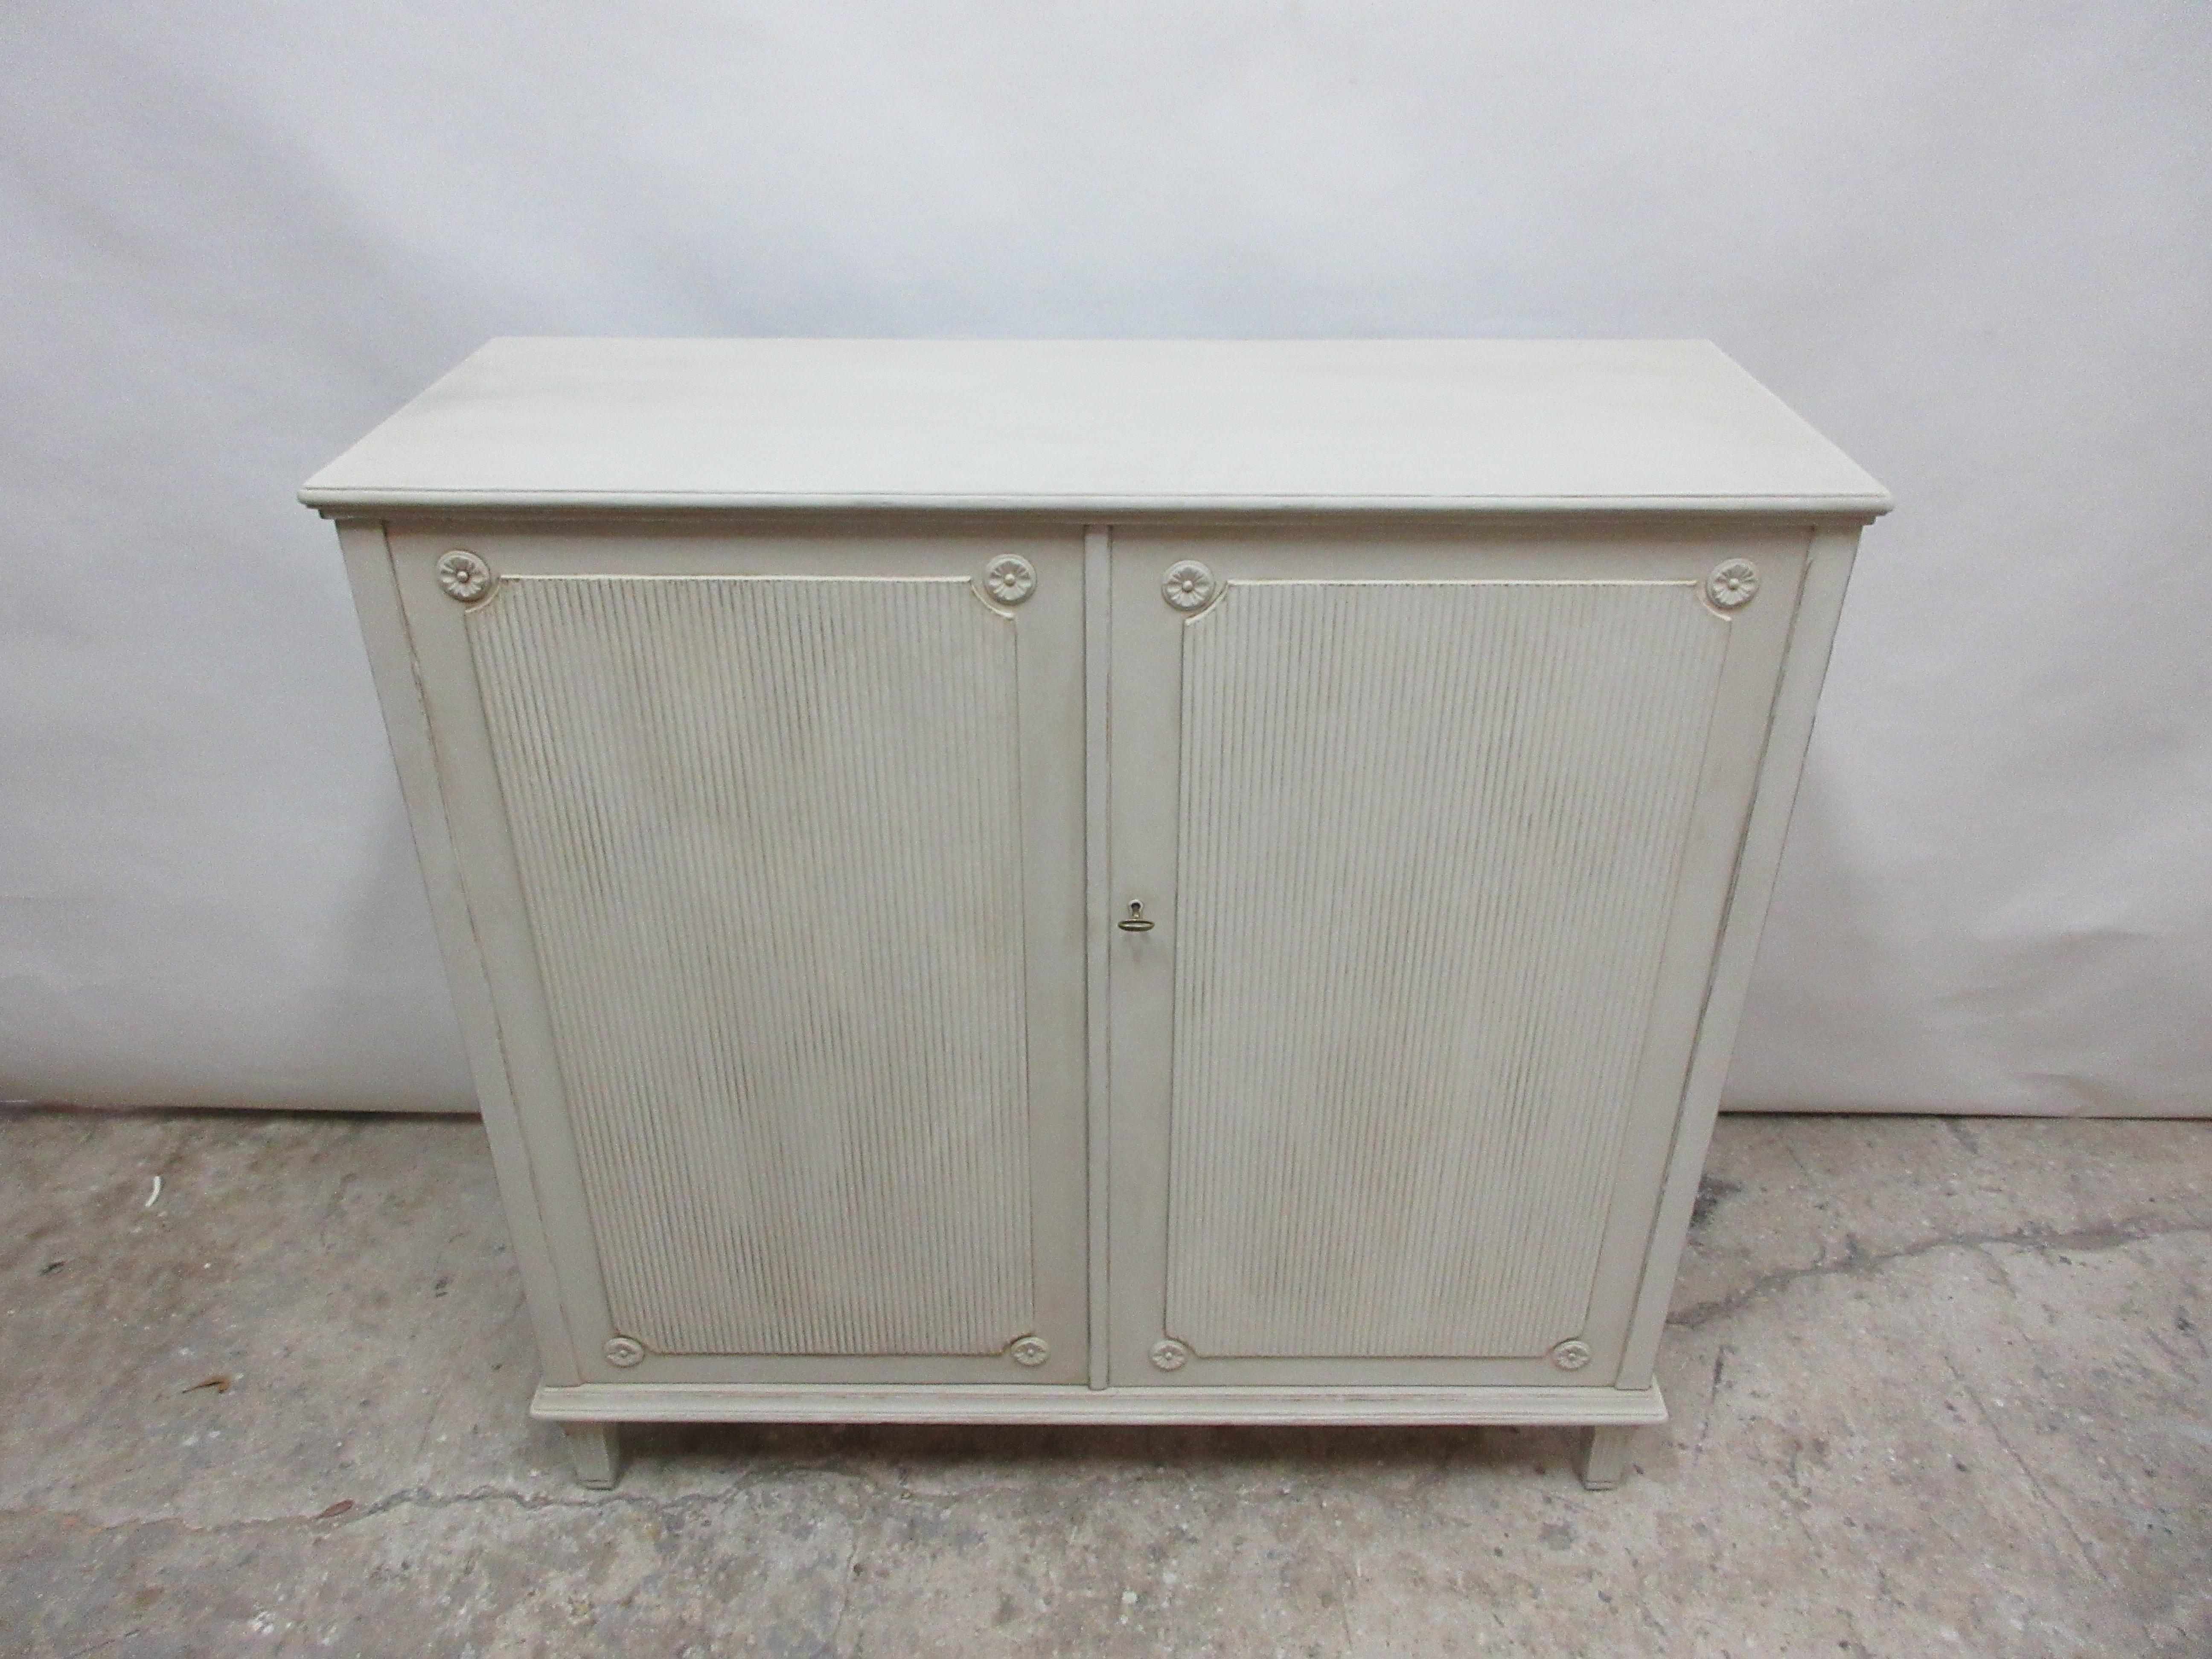 This is a Swedish Gustavian sideboard 2-door. It’s been restored and repainted with milk paints 